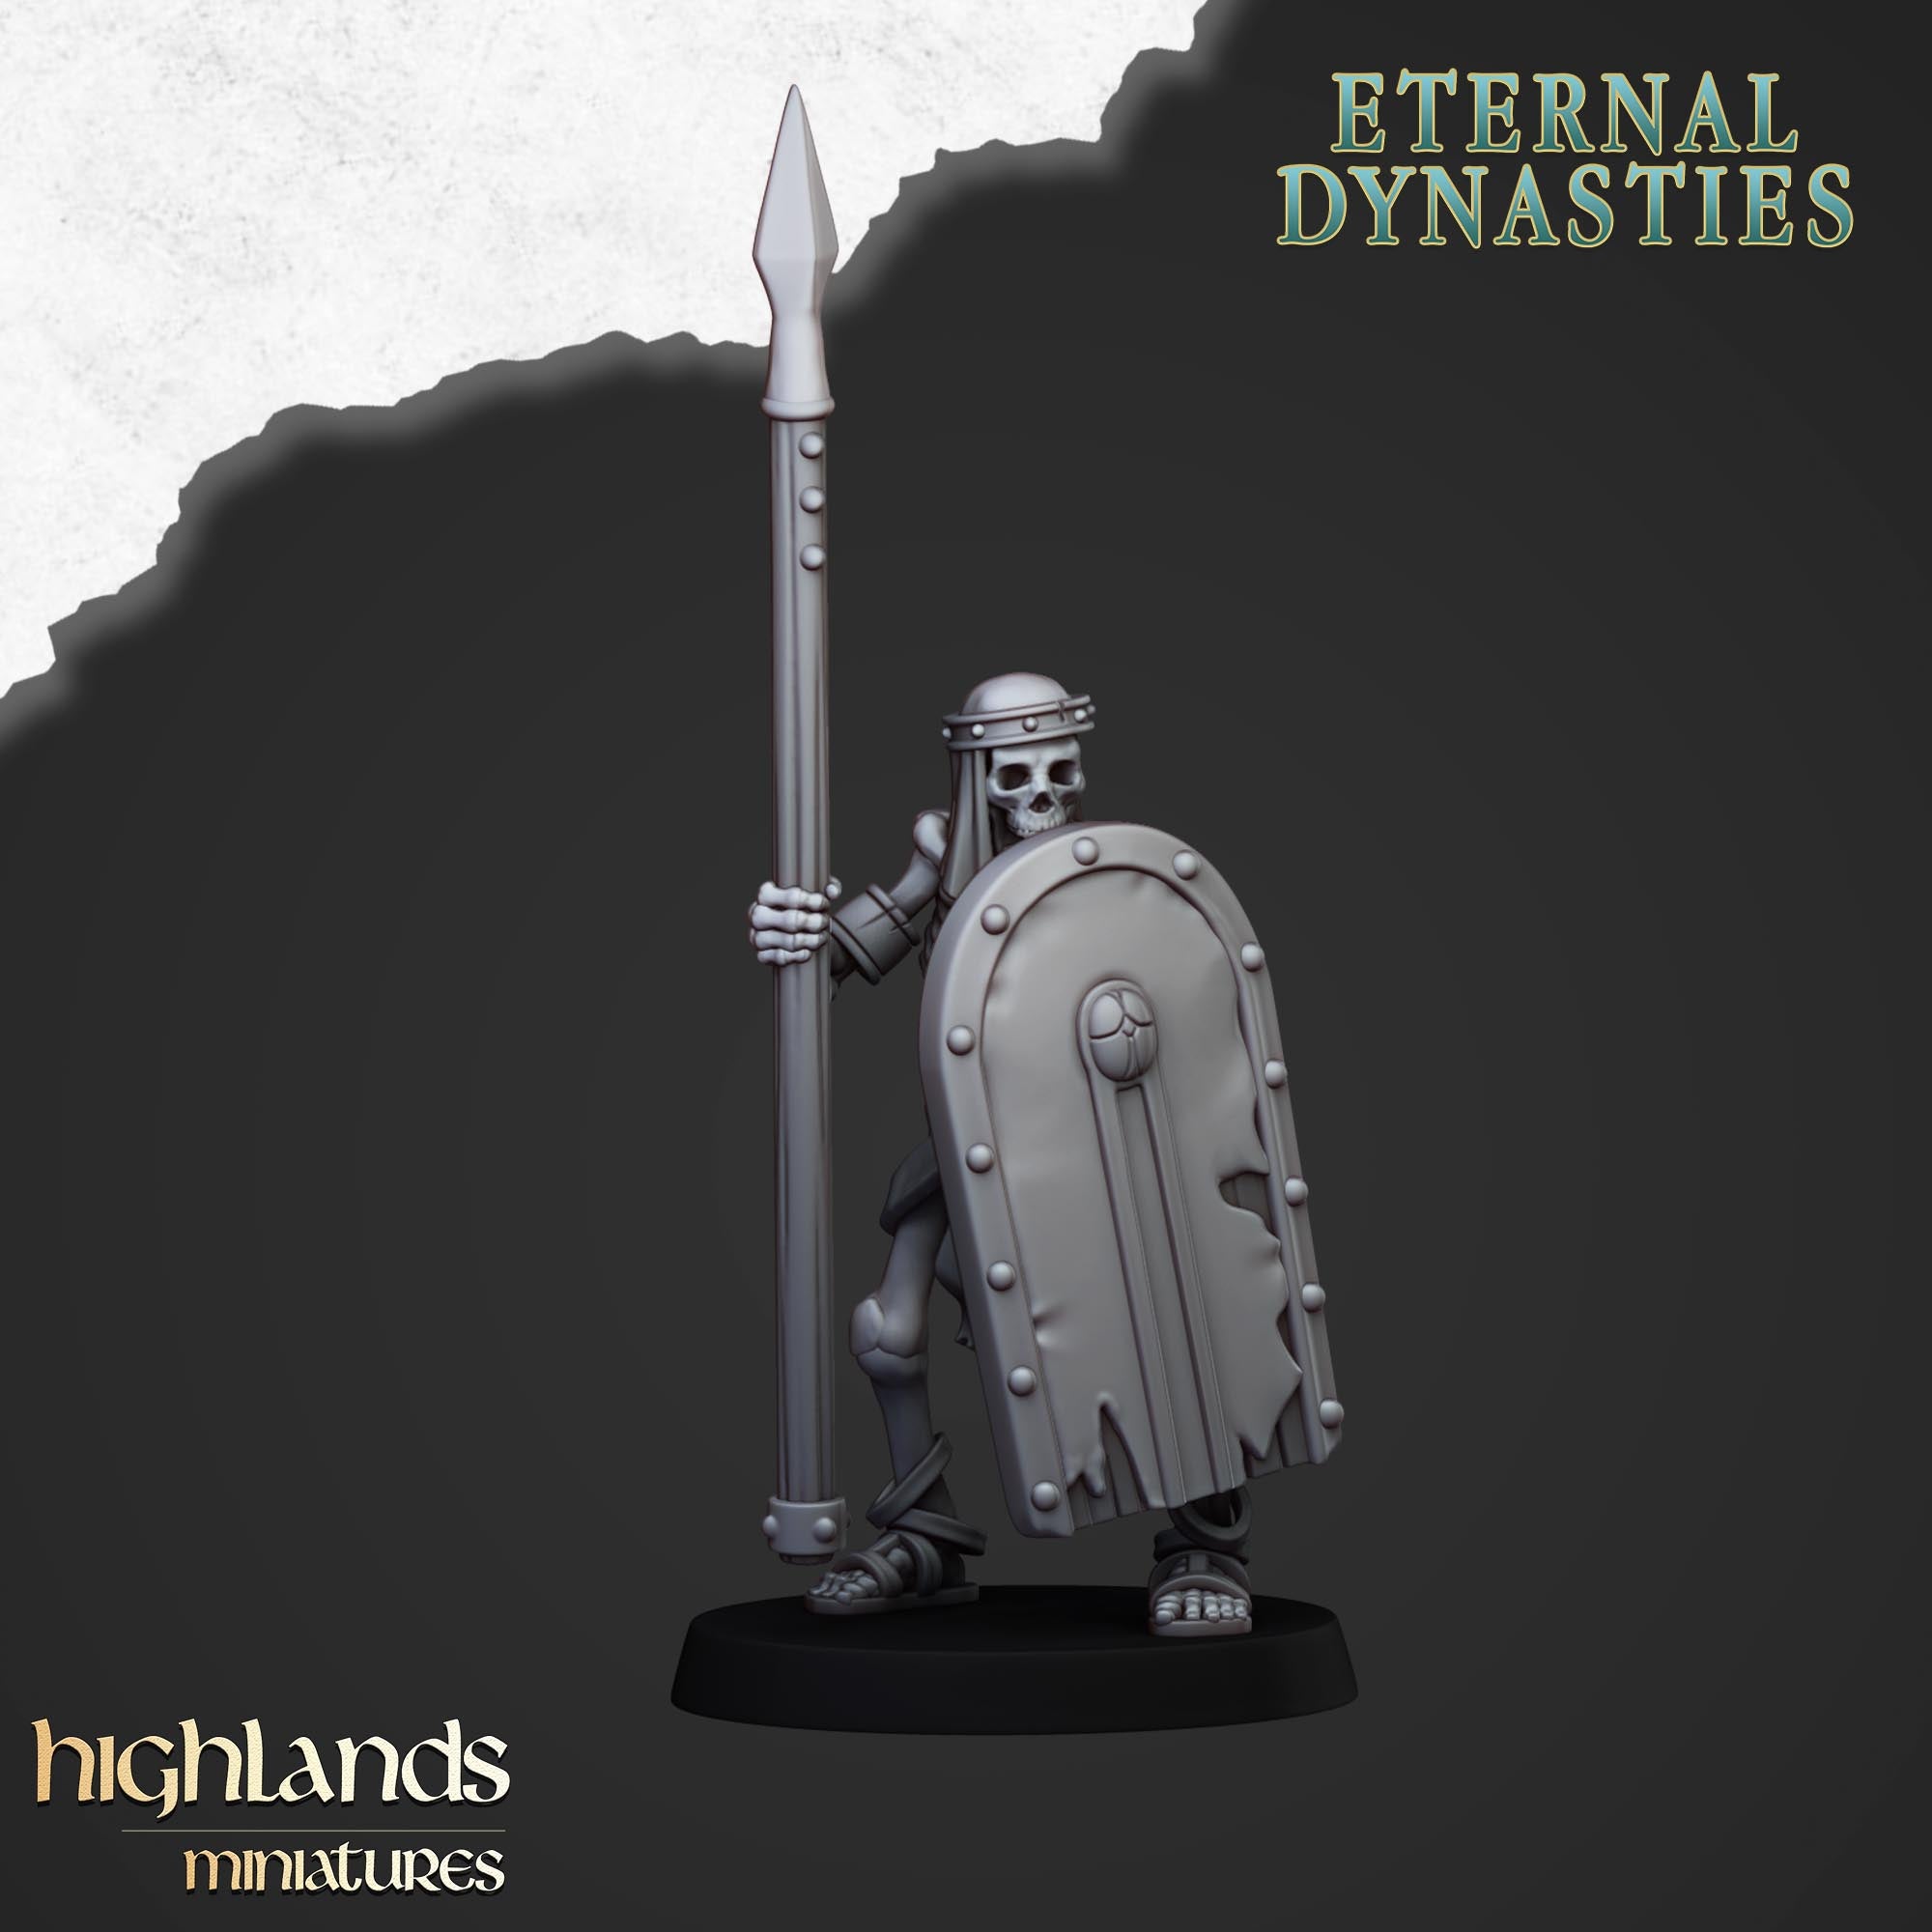 Ancient Skeletons with Spears (x15) - Eternal Dynasties - | Highlands Miniatures